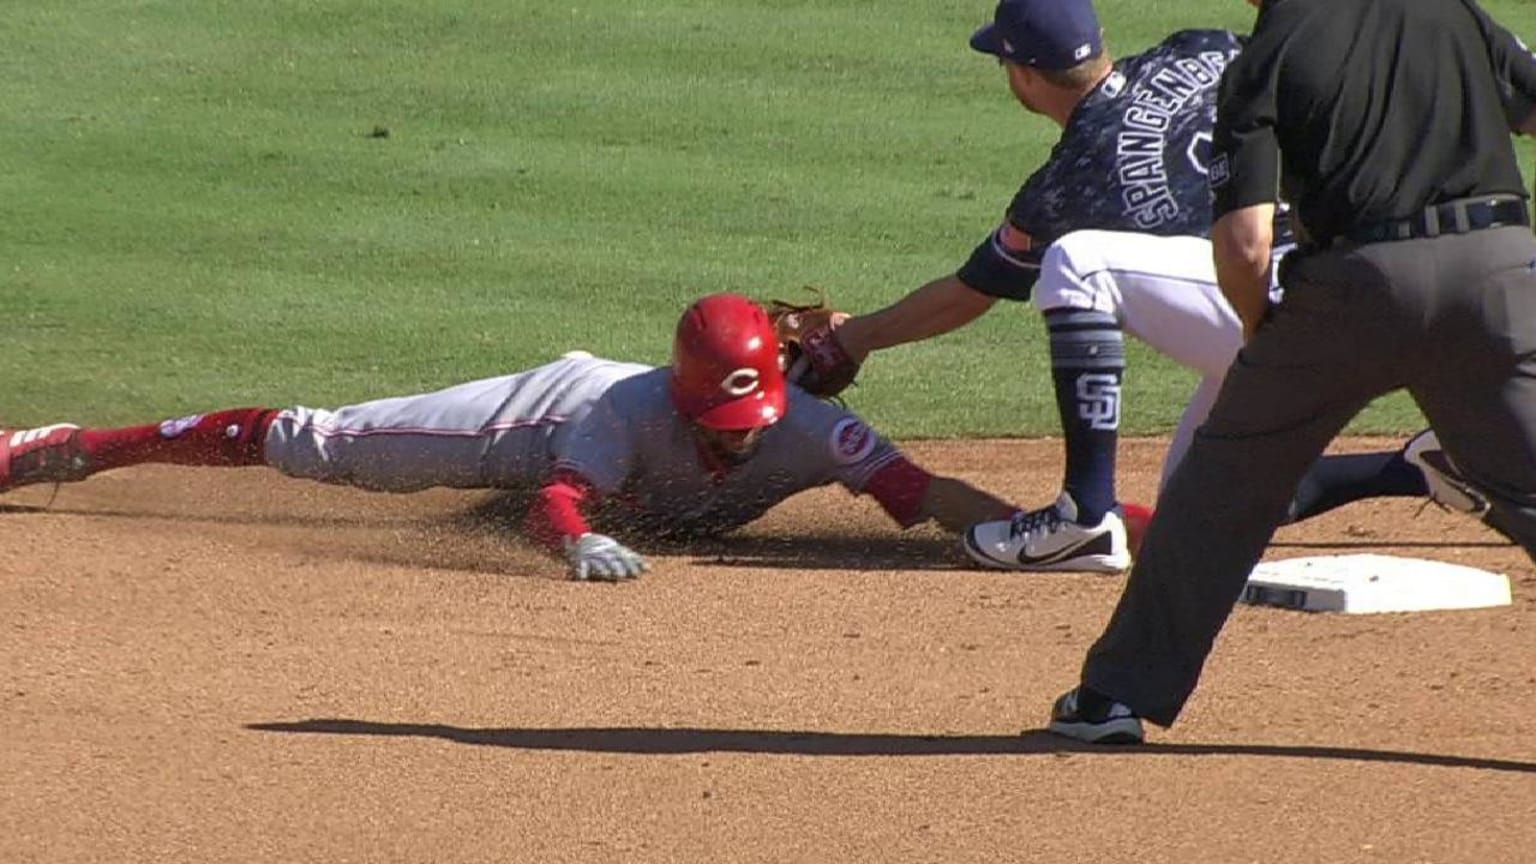 Billy Hamilton makes ridiculous catch to rob home run for Mariners